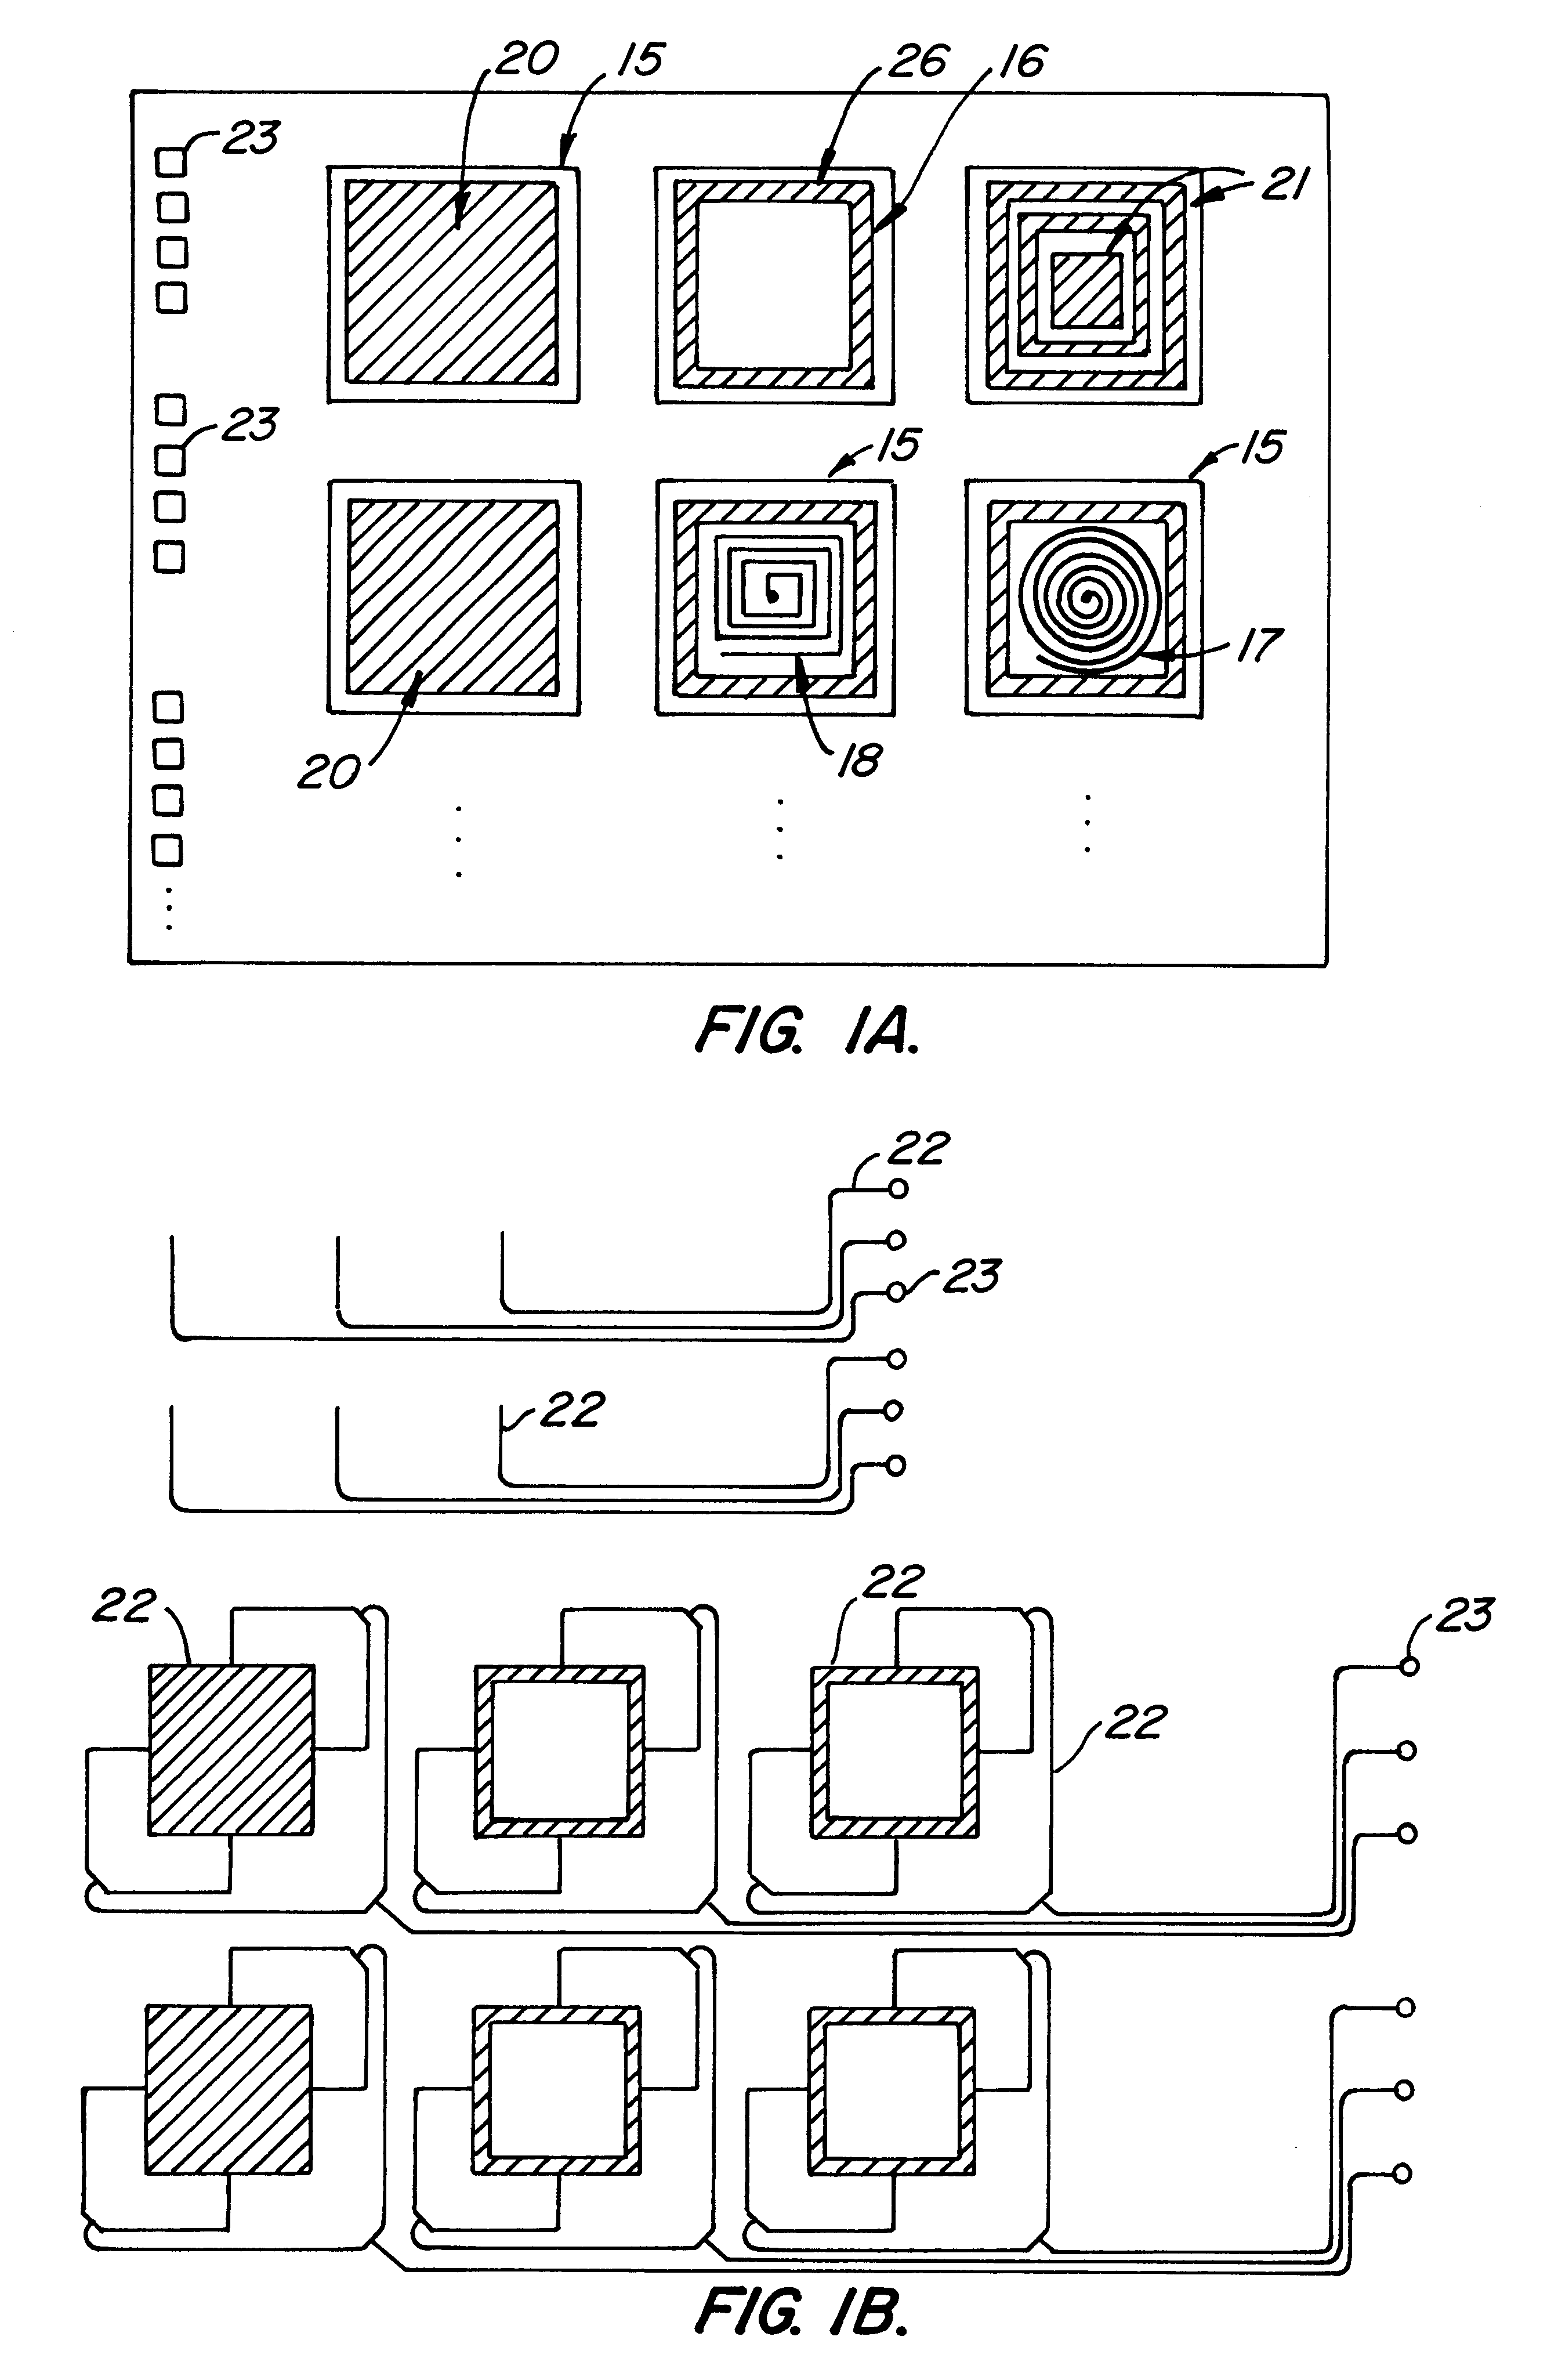 Microwave garment for heating and/or monitoring tissue